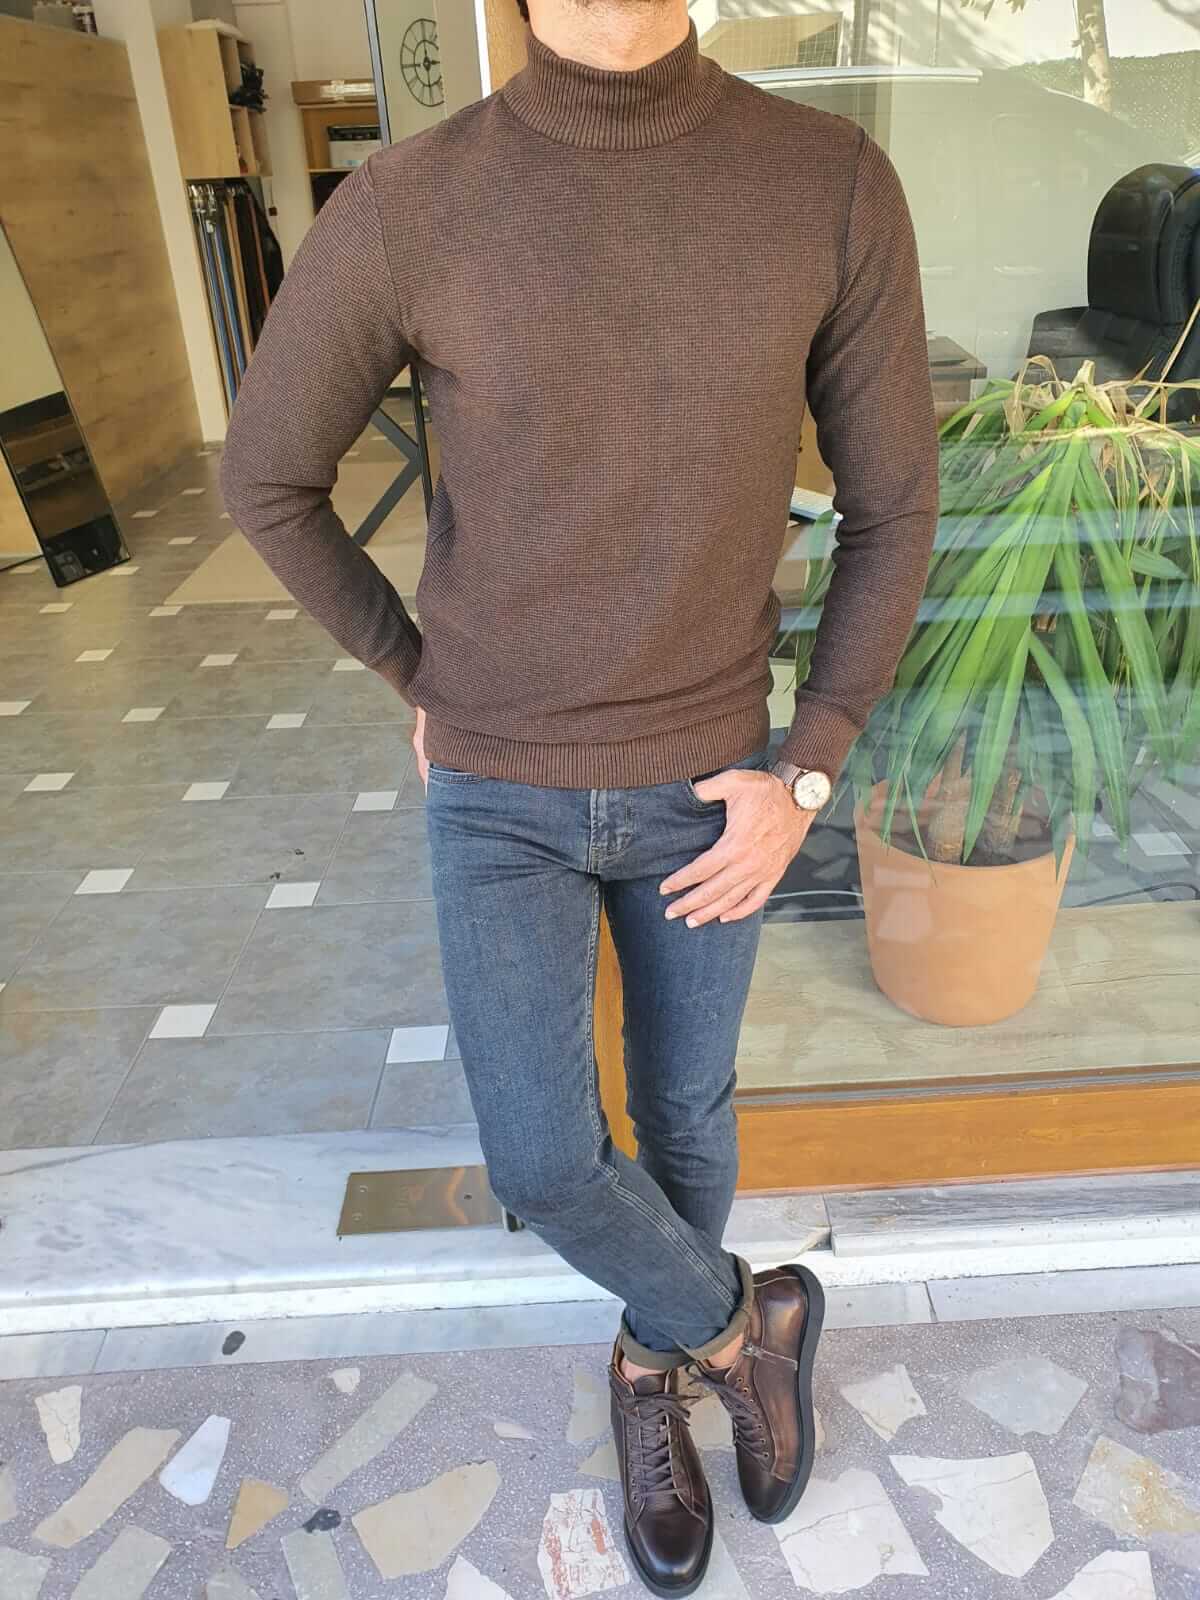 A brown half turtleneck sweater, designed in a slim fit style.